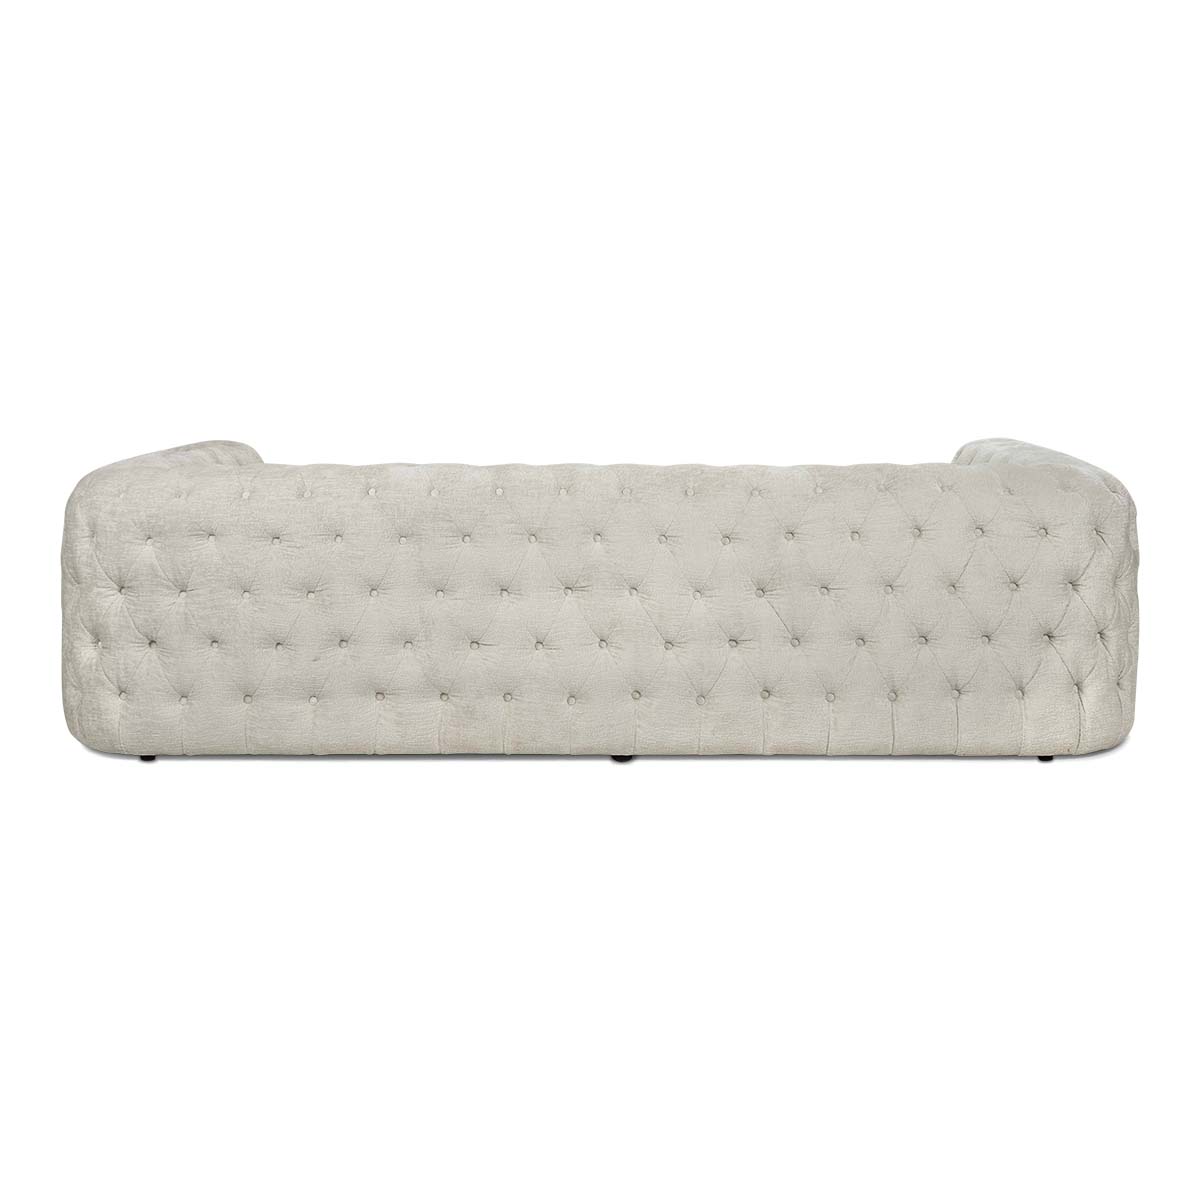 Palm Beach Sofa in Poodle